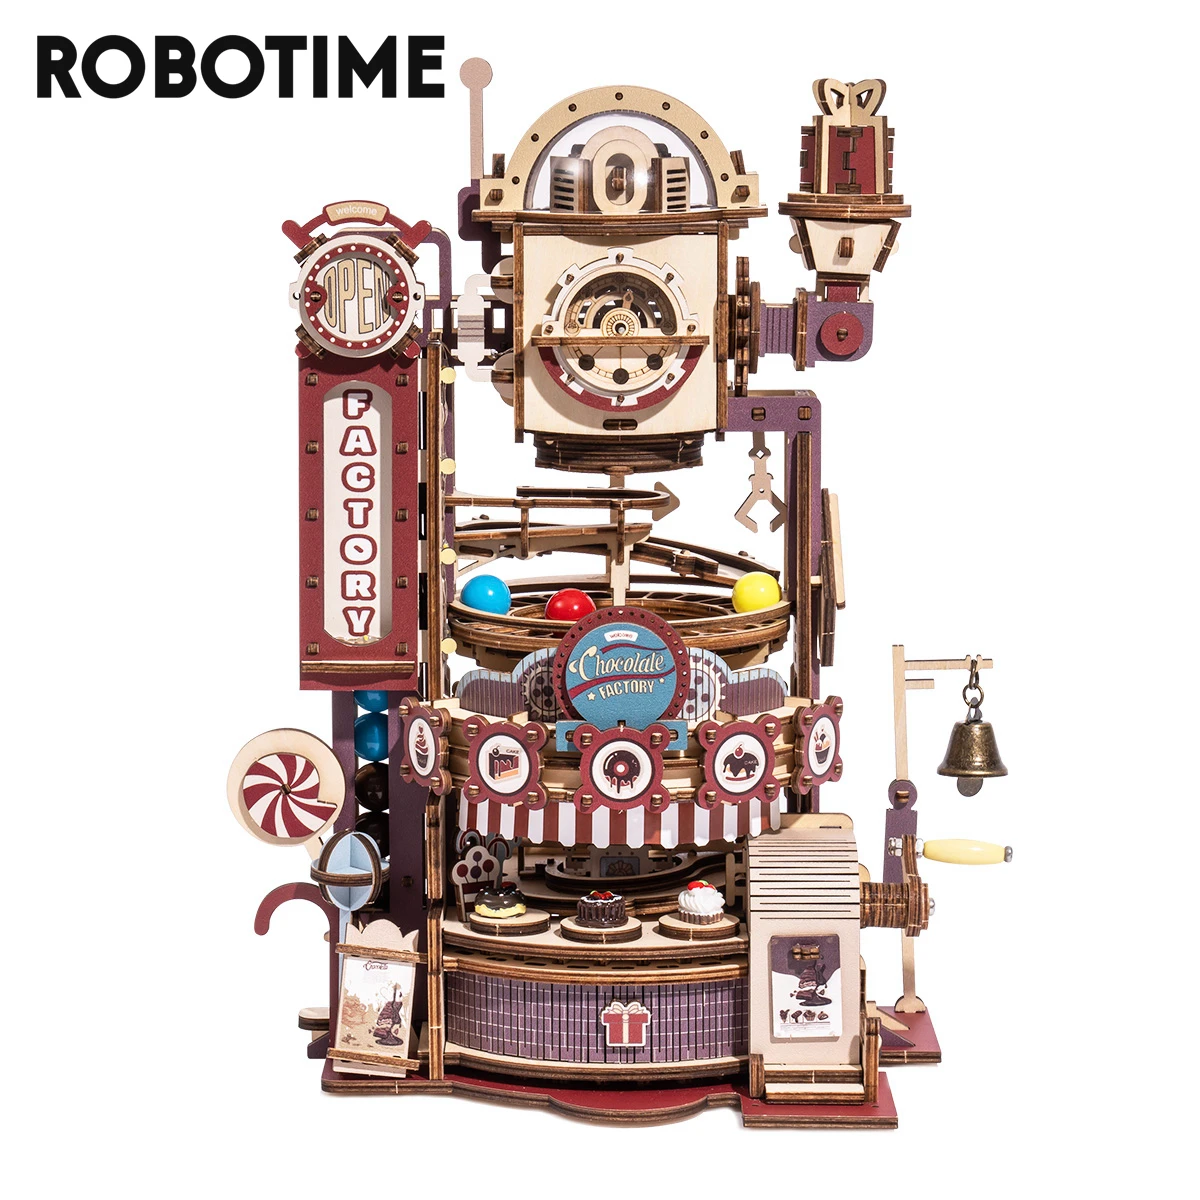 Robotime ROKR Marble Chocolate Factory 3D Wooden Puzzle Games Assembly Model Building Toys for Children Kids Adult Birthday Gift